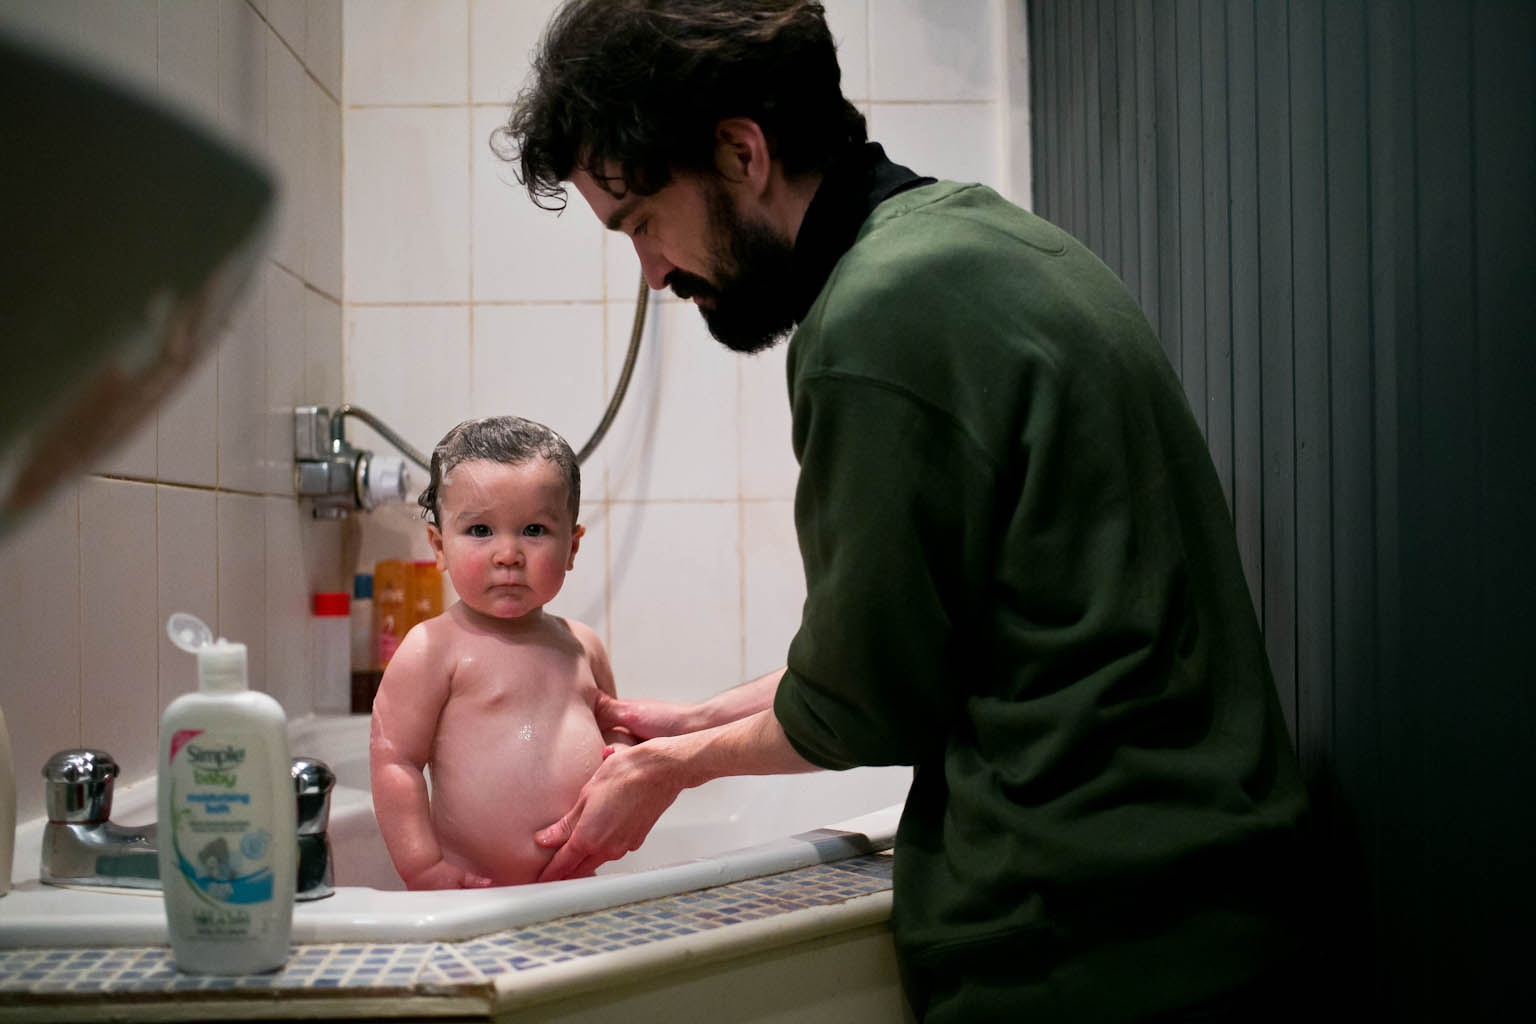 Father washing baby daughter's tummy in bath